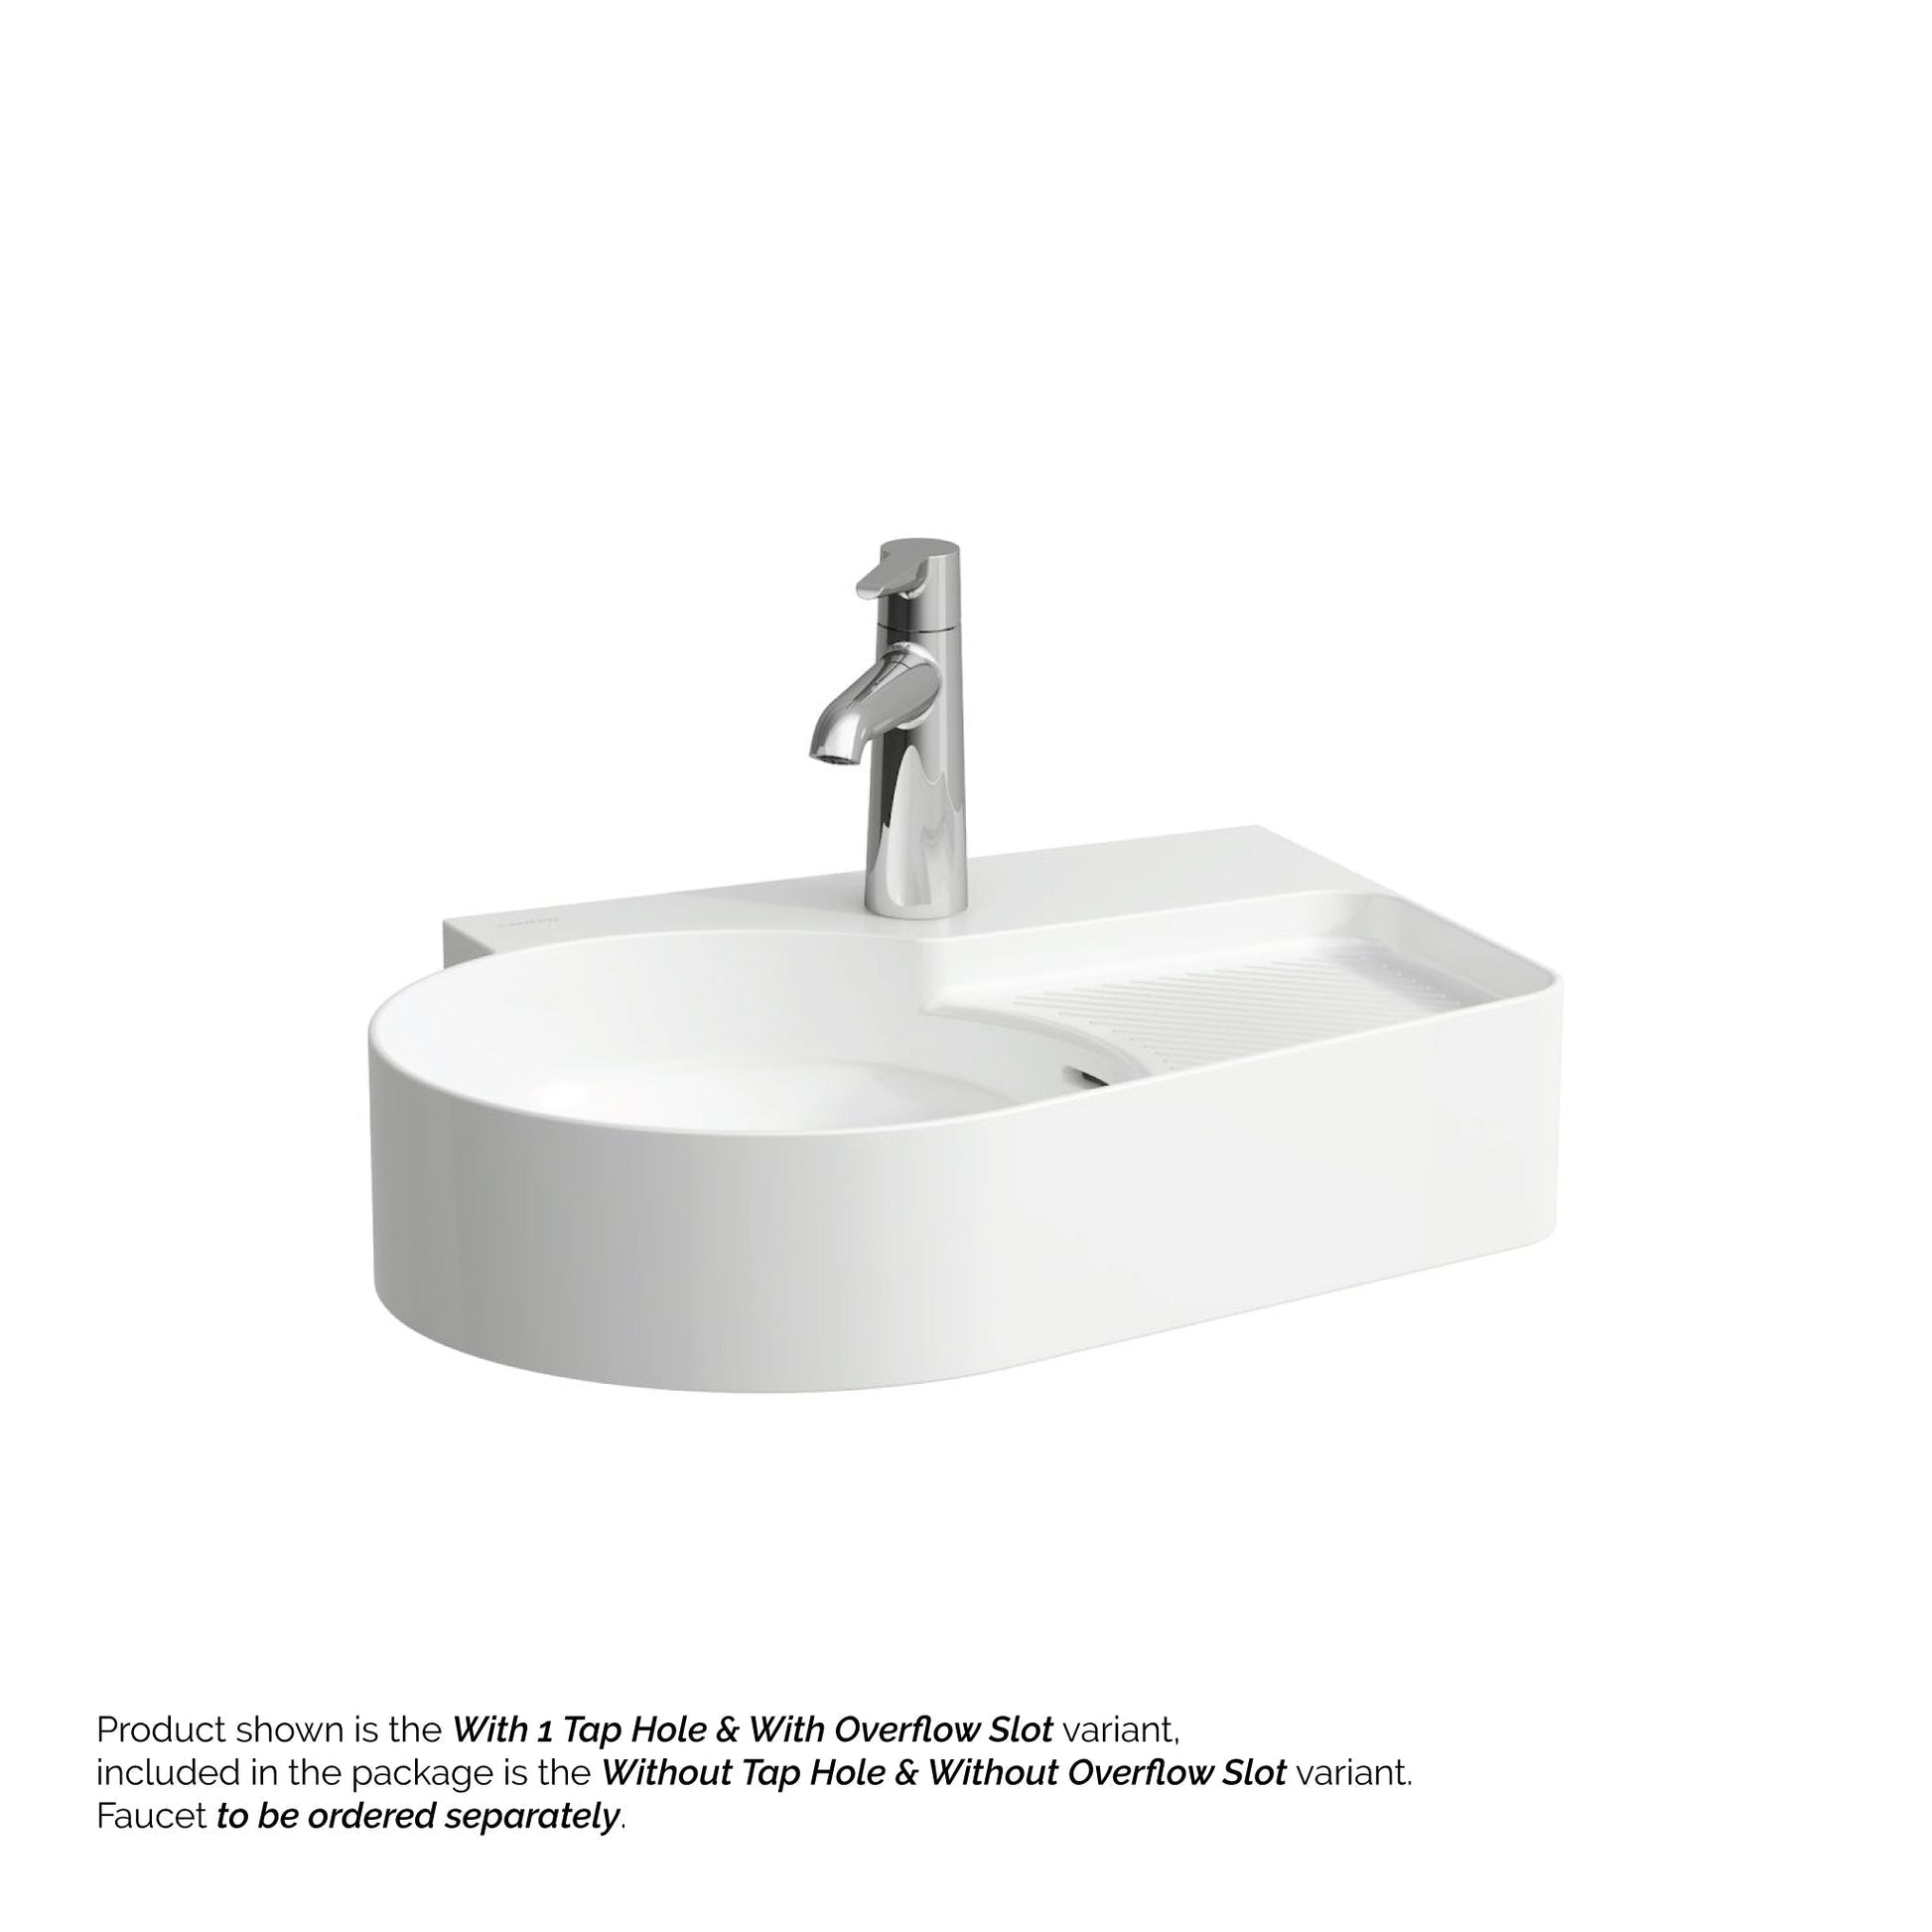 Laufen Val 21" x 16" White Countertop Bathroom Sink Without Faucet Hole and Overflow Slot